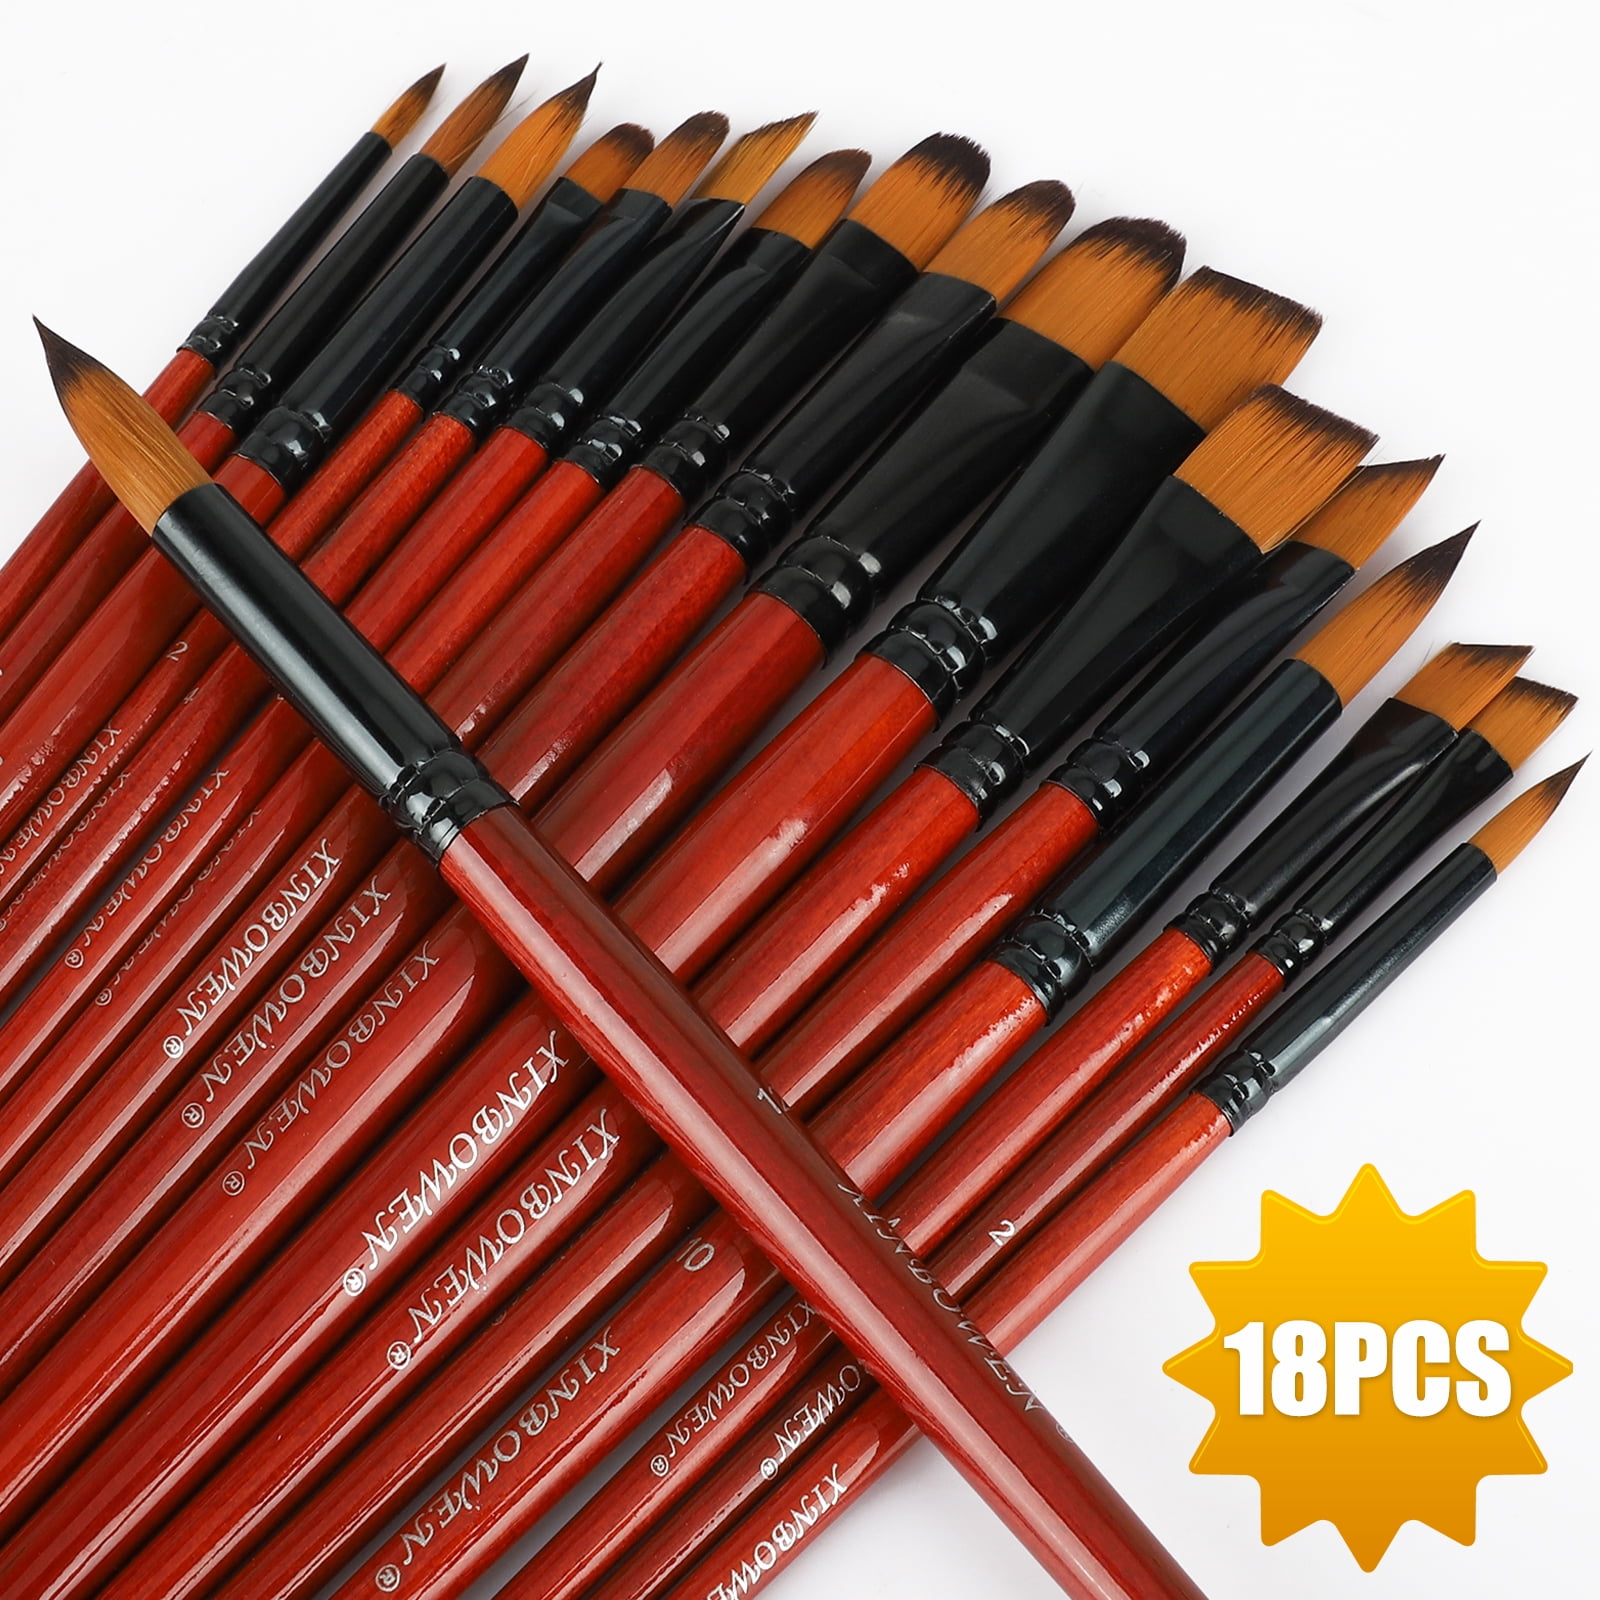 TSV 10 Pcs Paint Brushes Set for Watercolor, Oil, Gouache, Acrylic Painting Brush with Carrying Case for All Ages - Red, Size: Middle